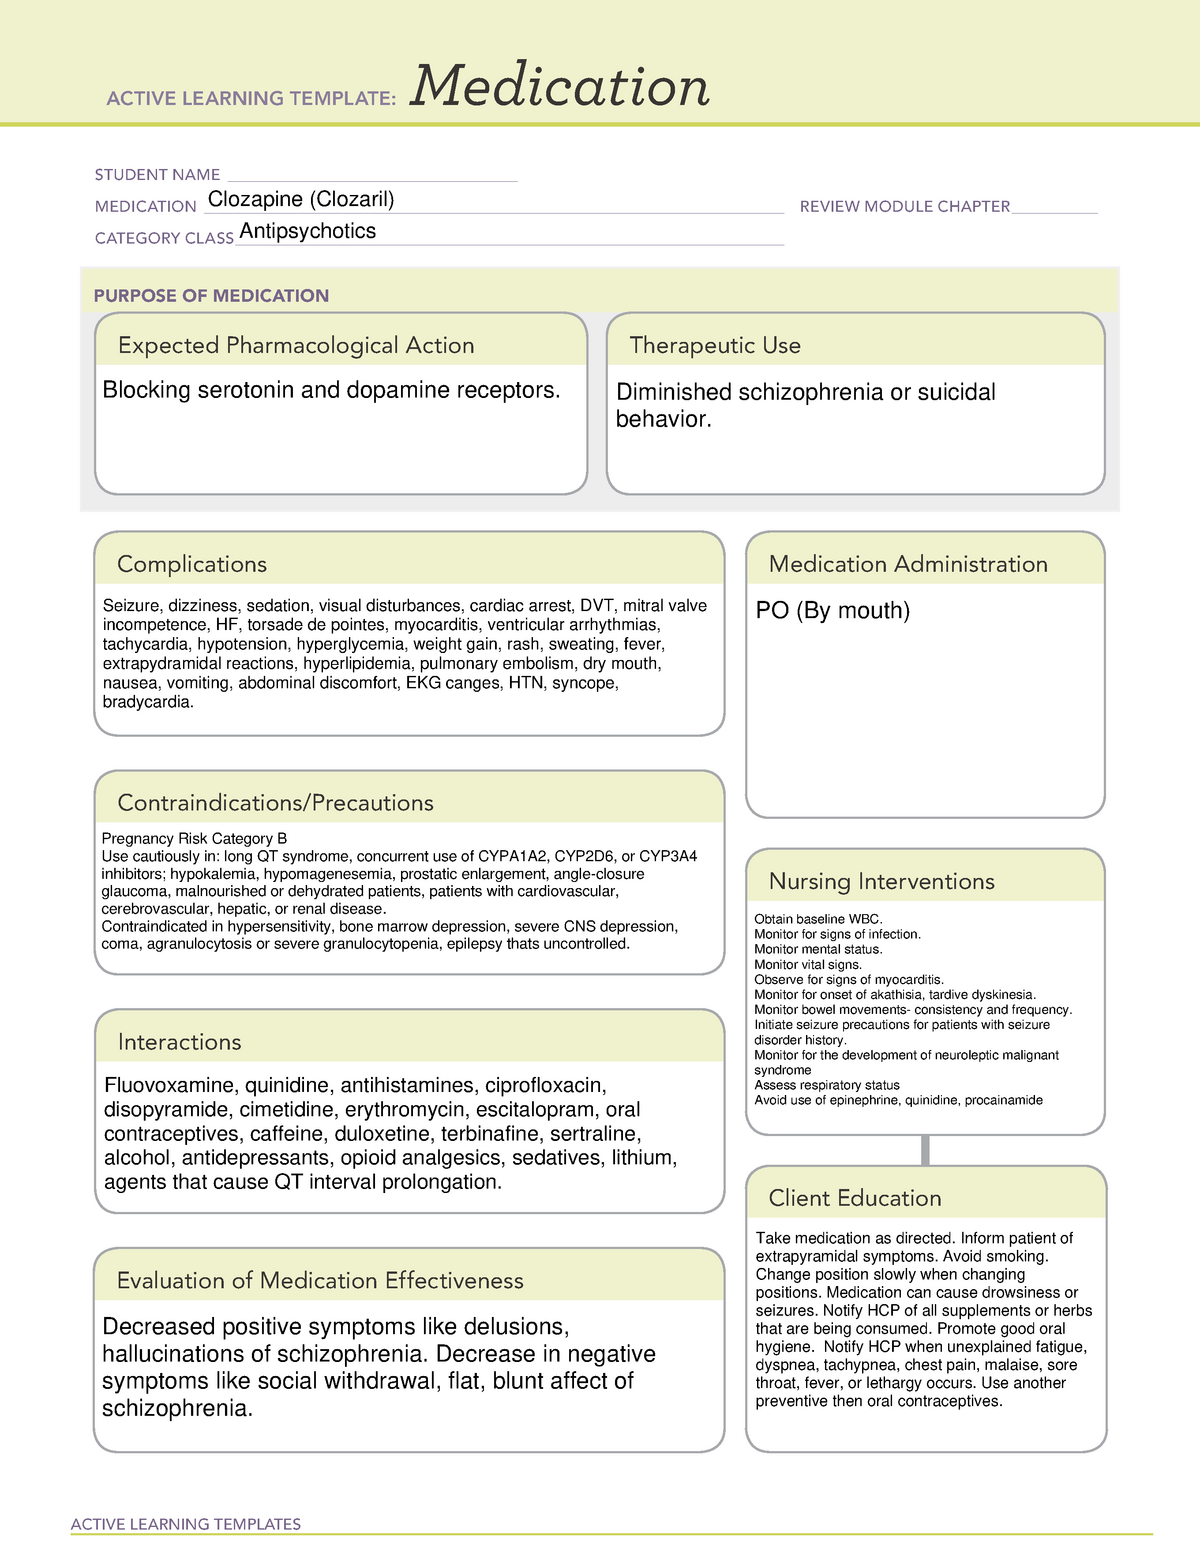 clozapine-drug-card-pharm-active-learning-templates-medication-student-name